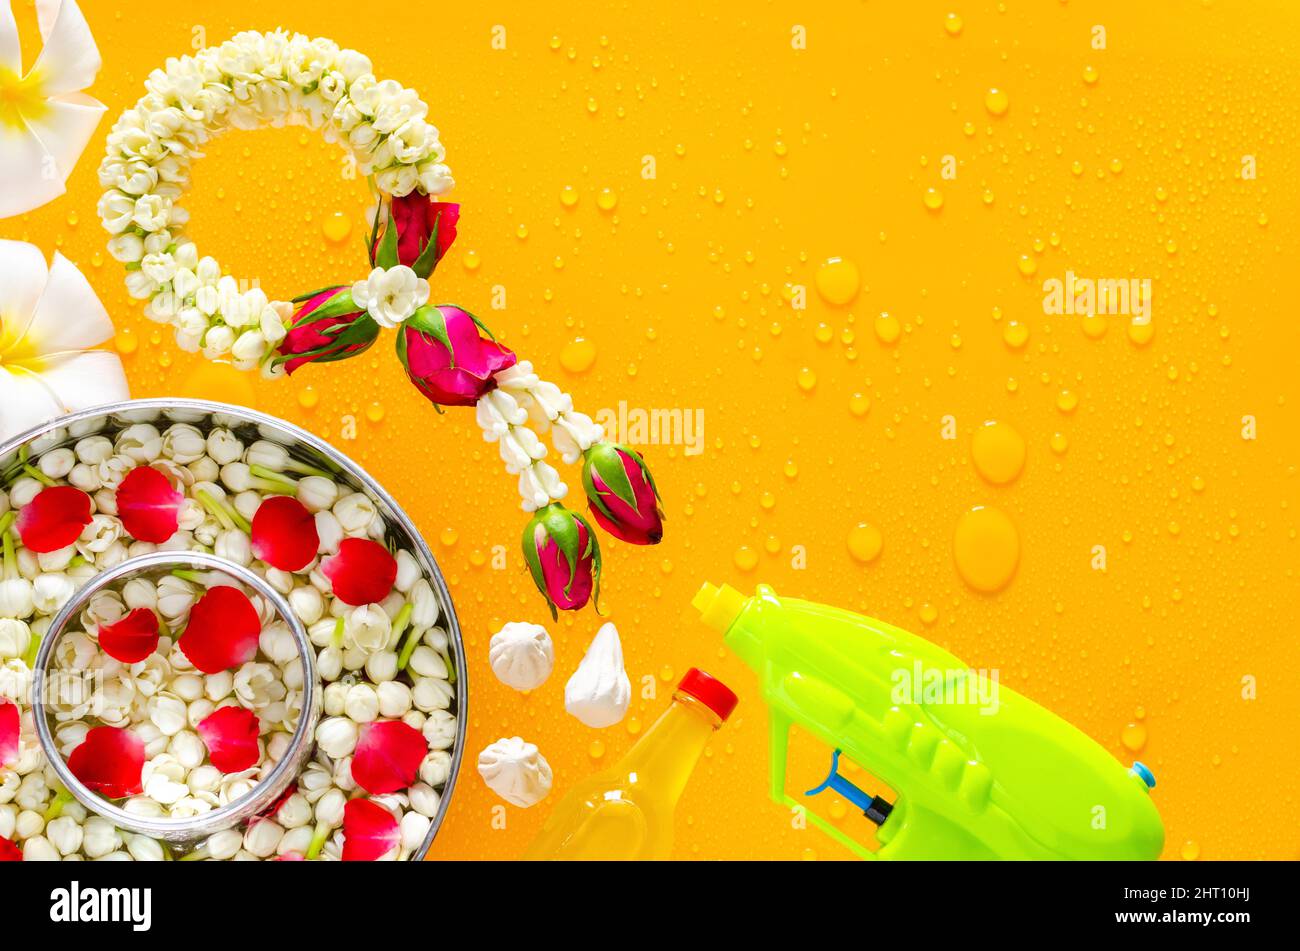 Songkran festival background with jasmine garland, water gun, flowers in water bowls, scented water and marly limestone put on clear mirror that have Stock Photo